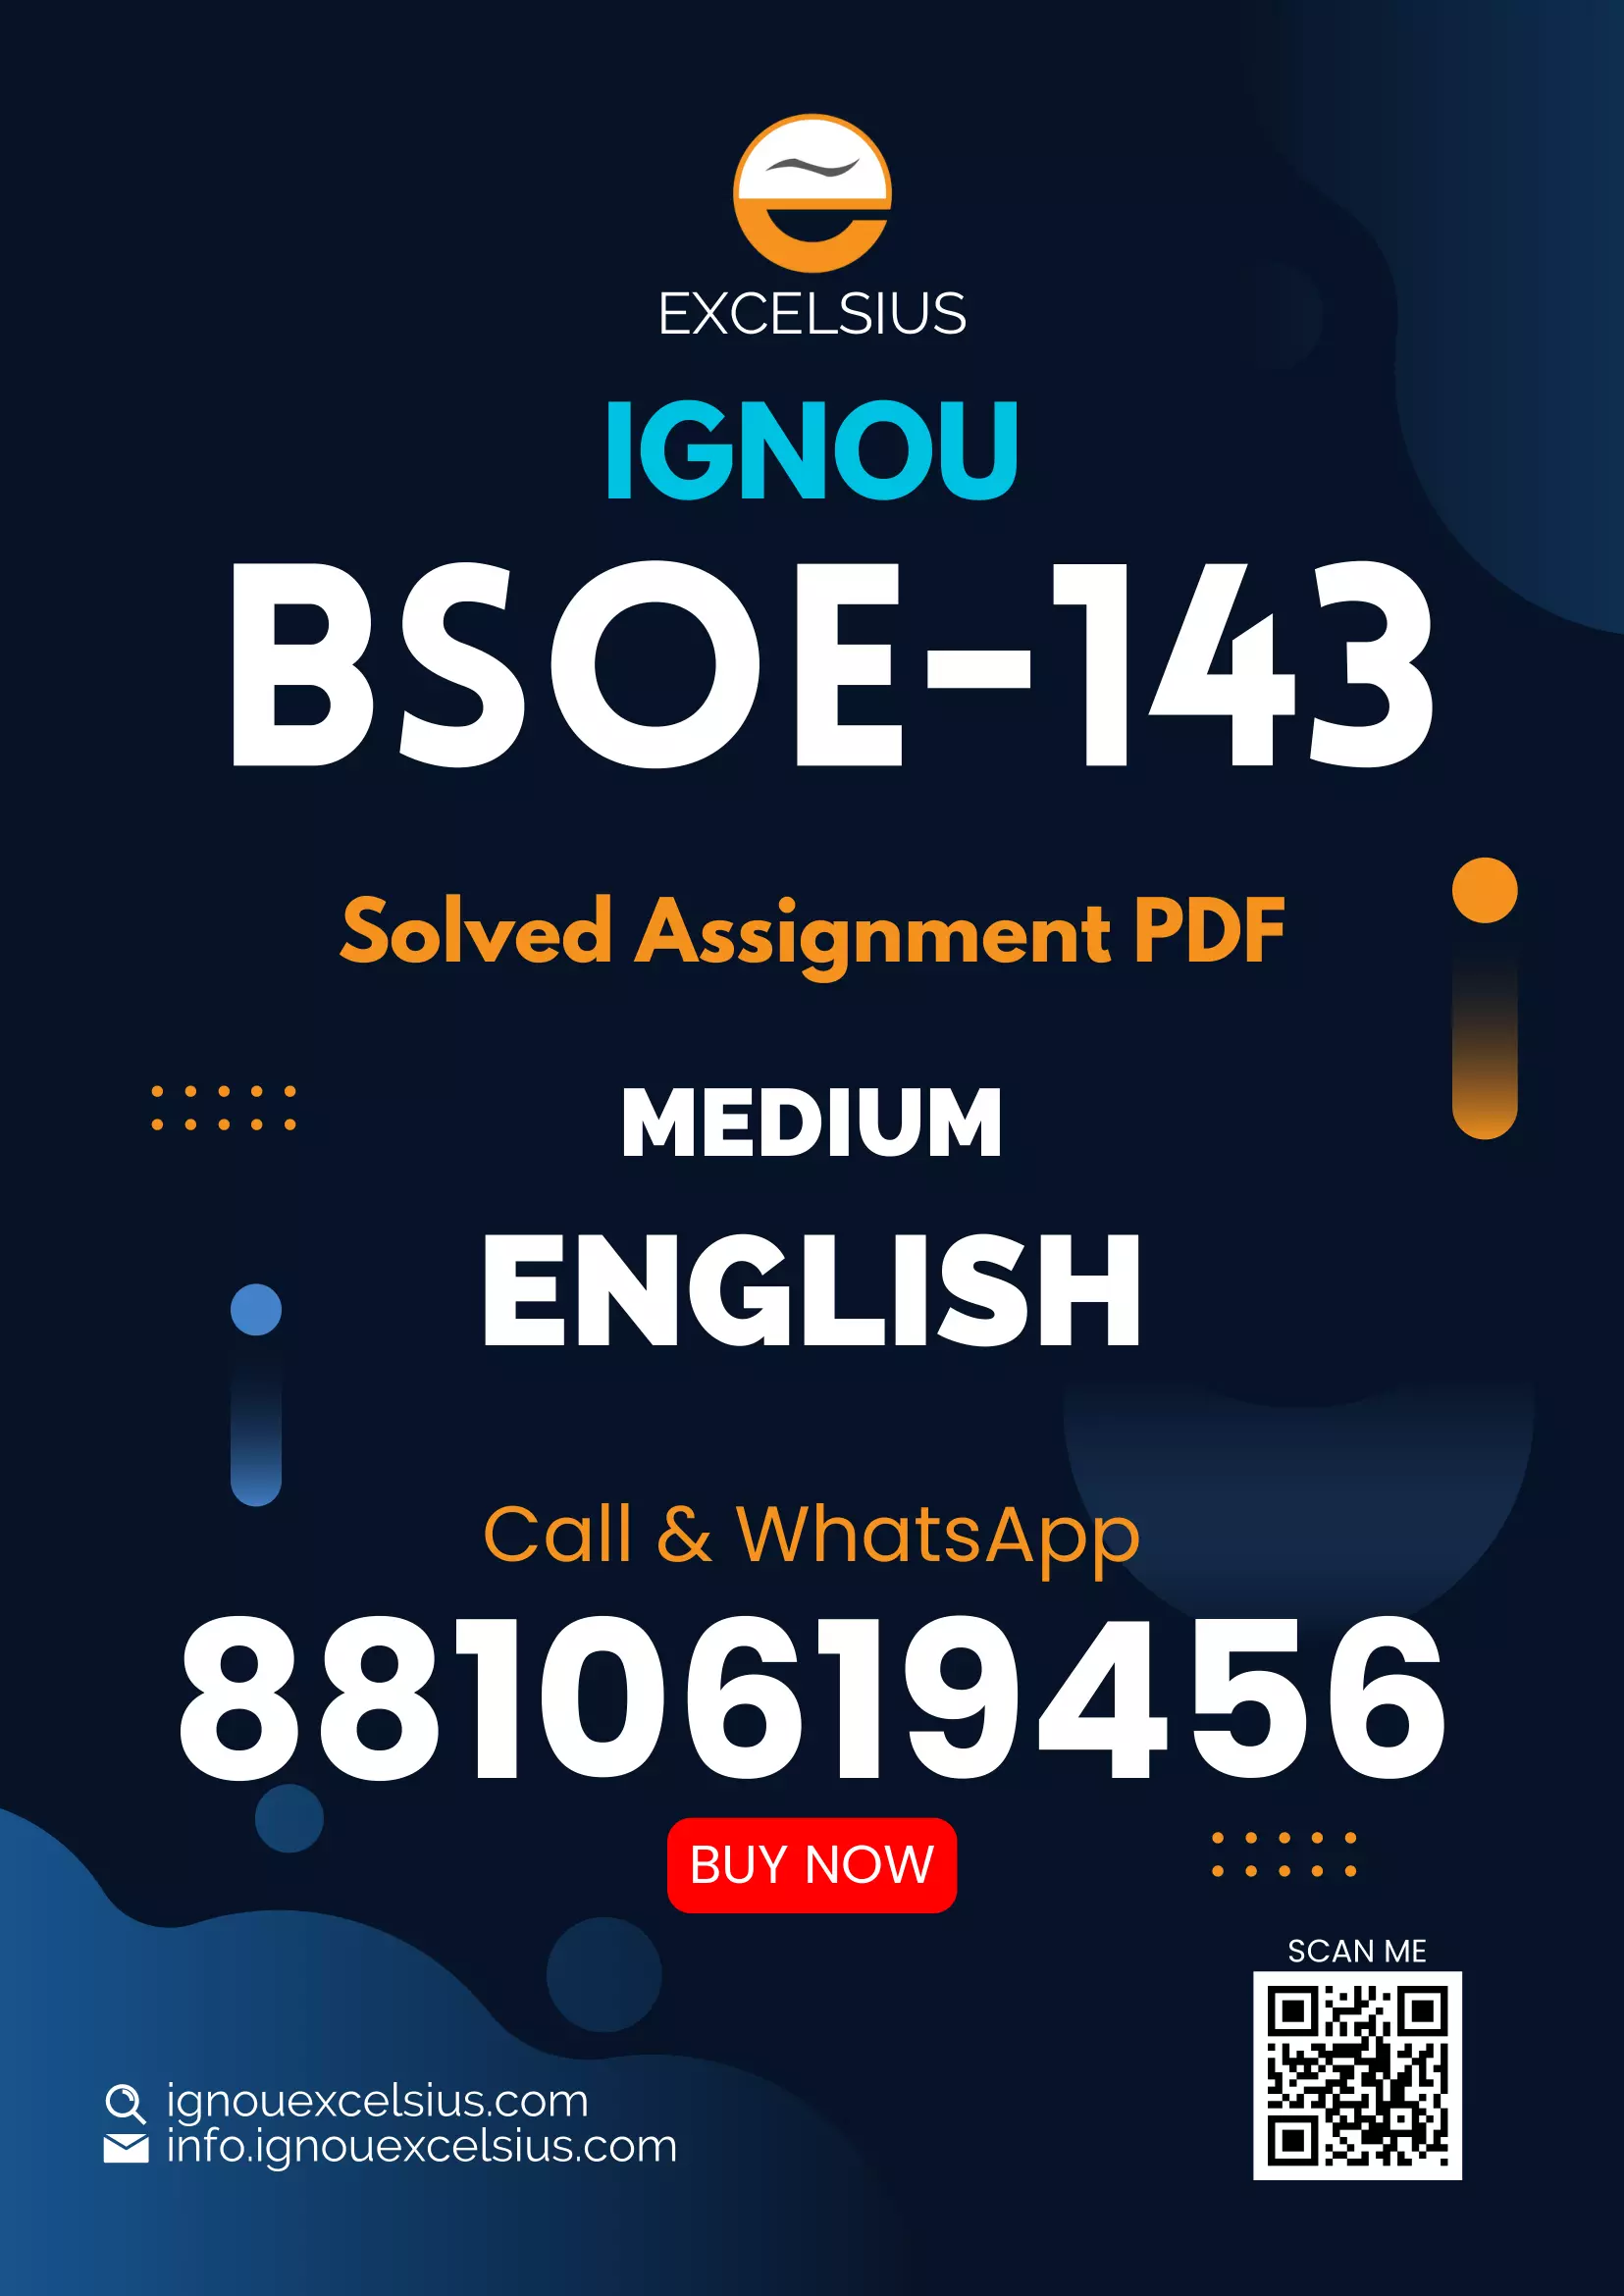 IGNOU BSOE-143 - Environmental Sociology, Latest Solved Assignment-July 2022 – January 2023